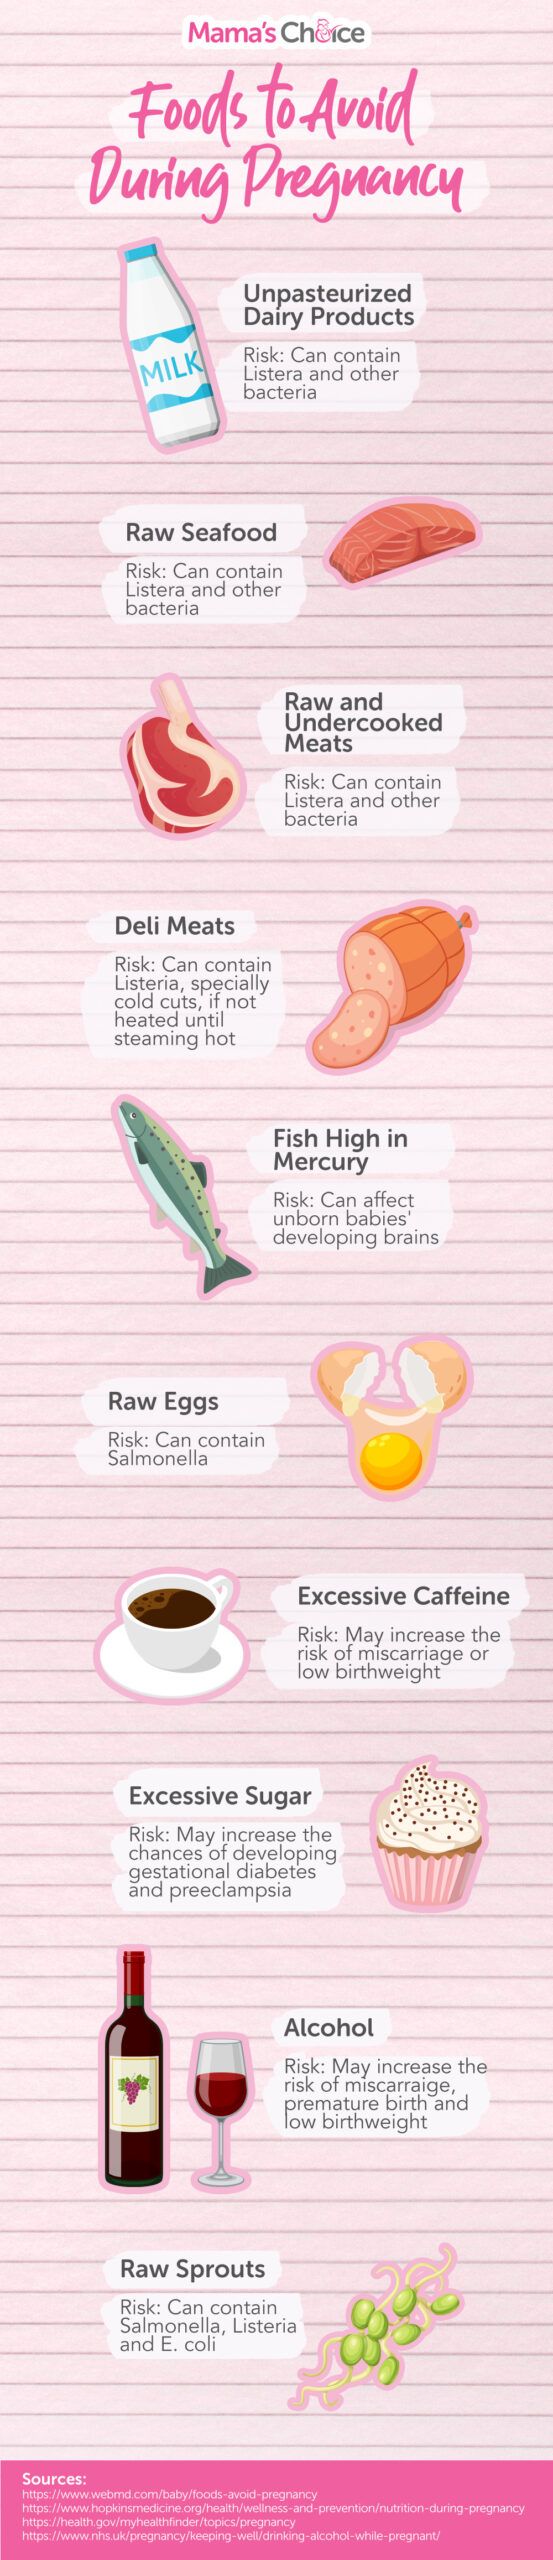 Foods to avoid during pregnancy infographic